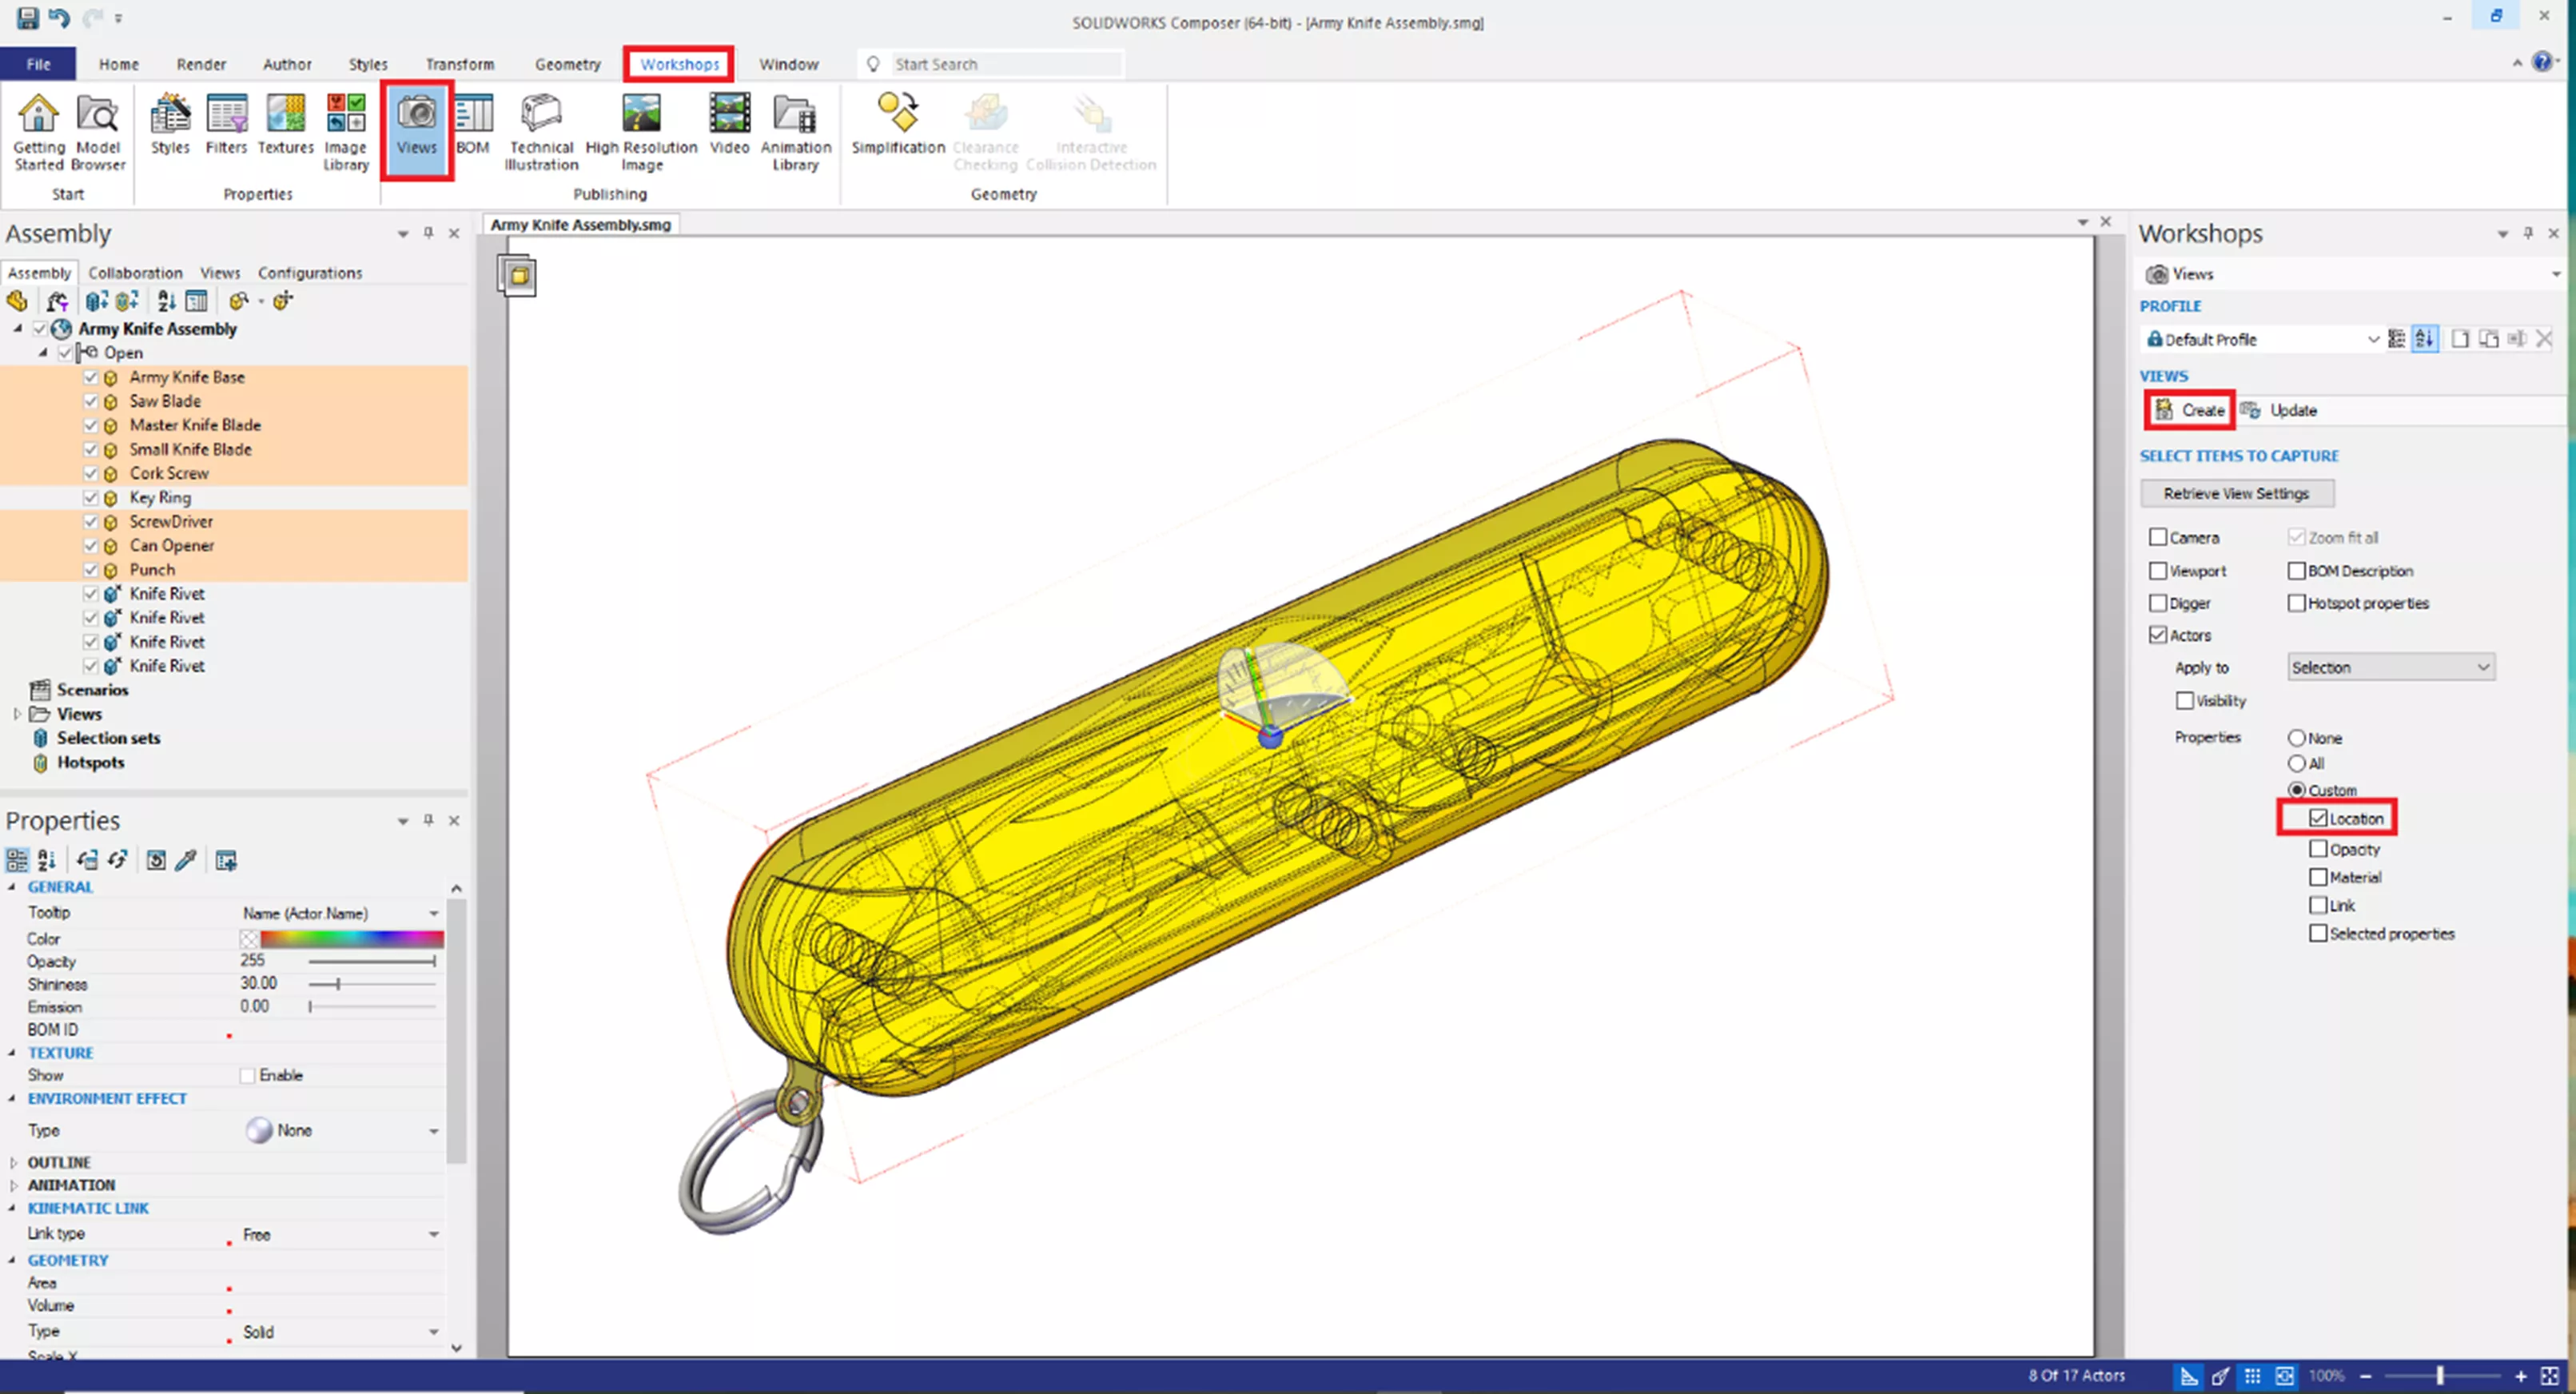 How to Create Custom Views in SOLIDWORKS Composer 